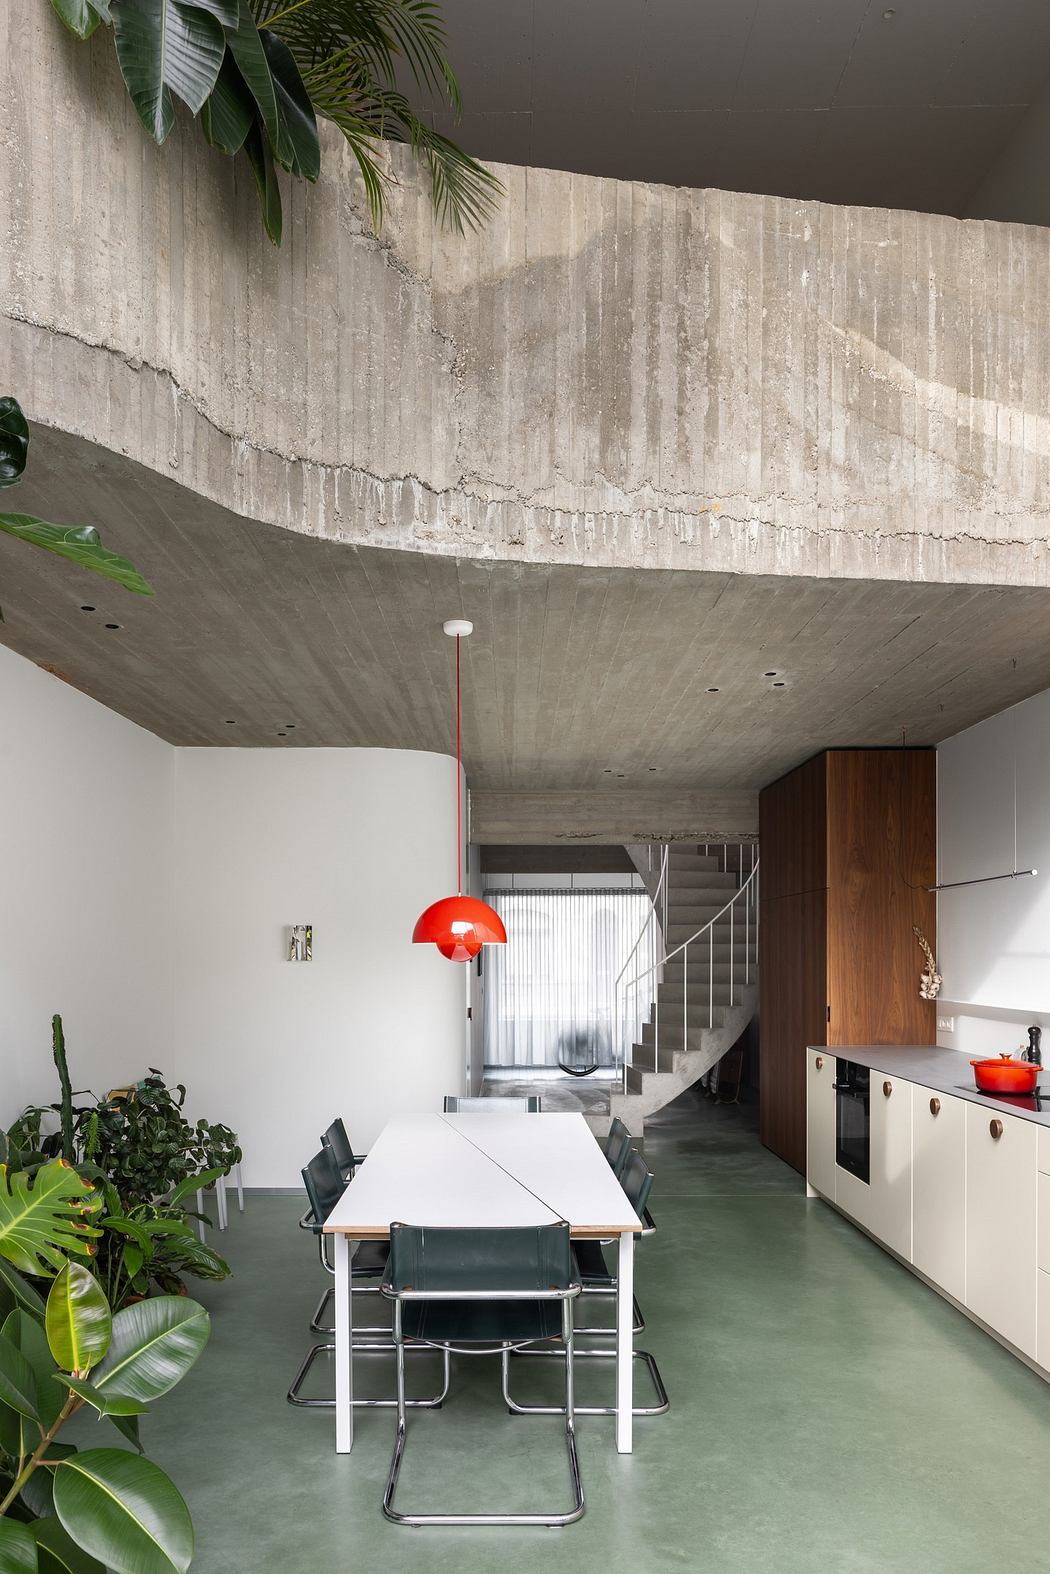 Modern interior with exposed concrete ceiling, minimalist furniture, and greenery.